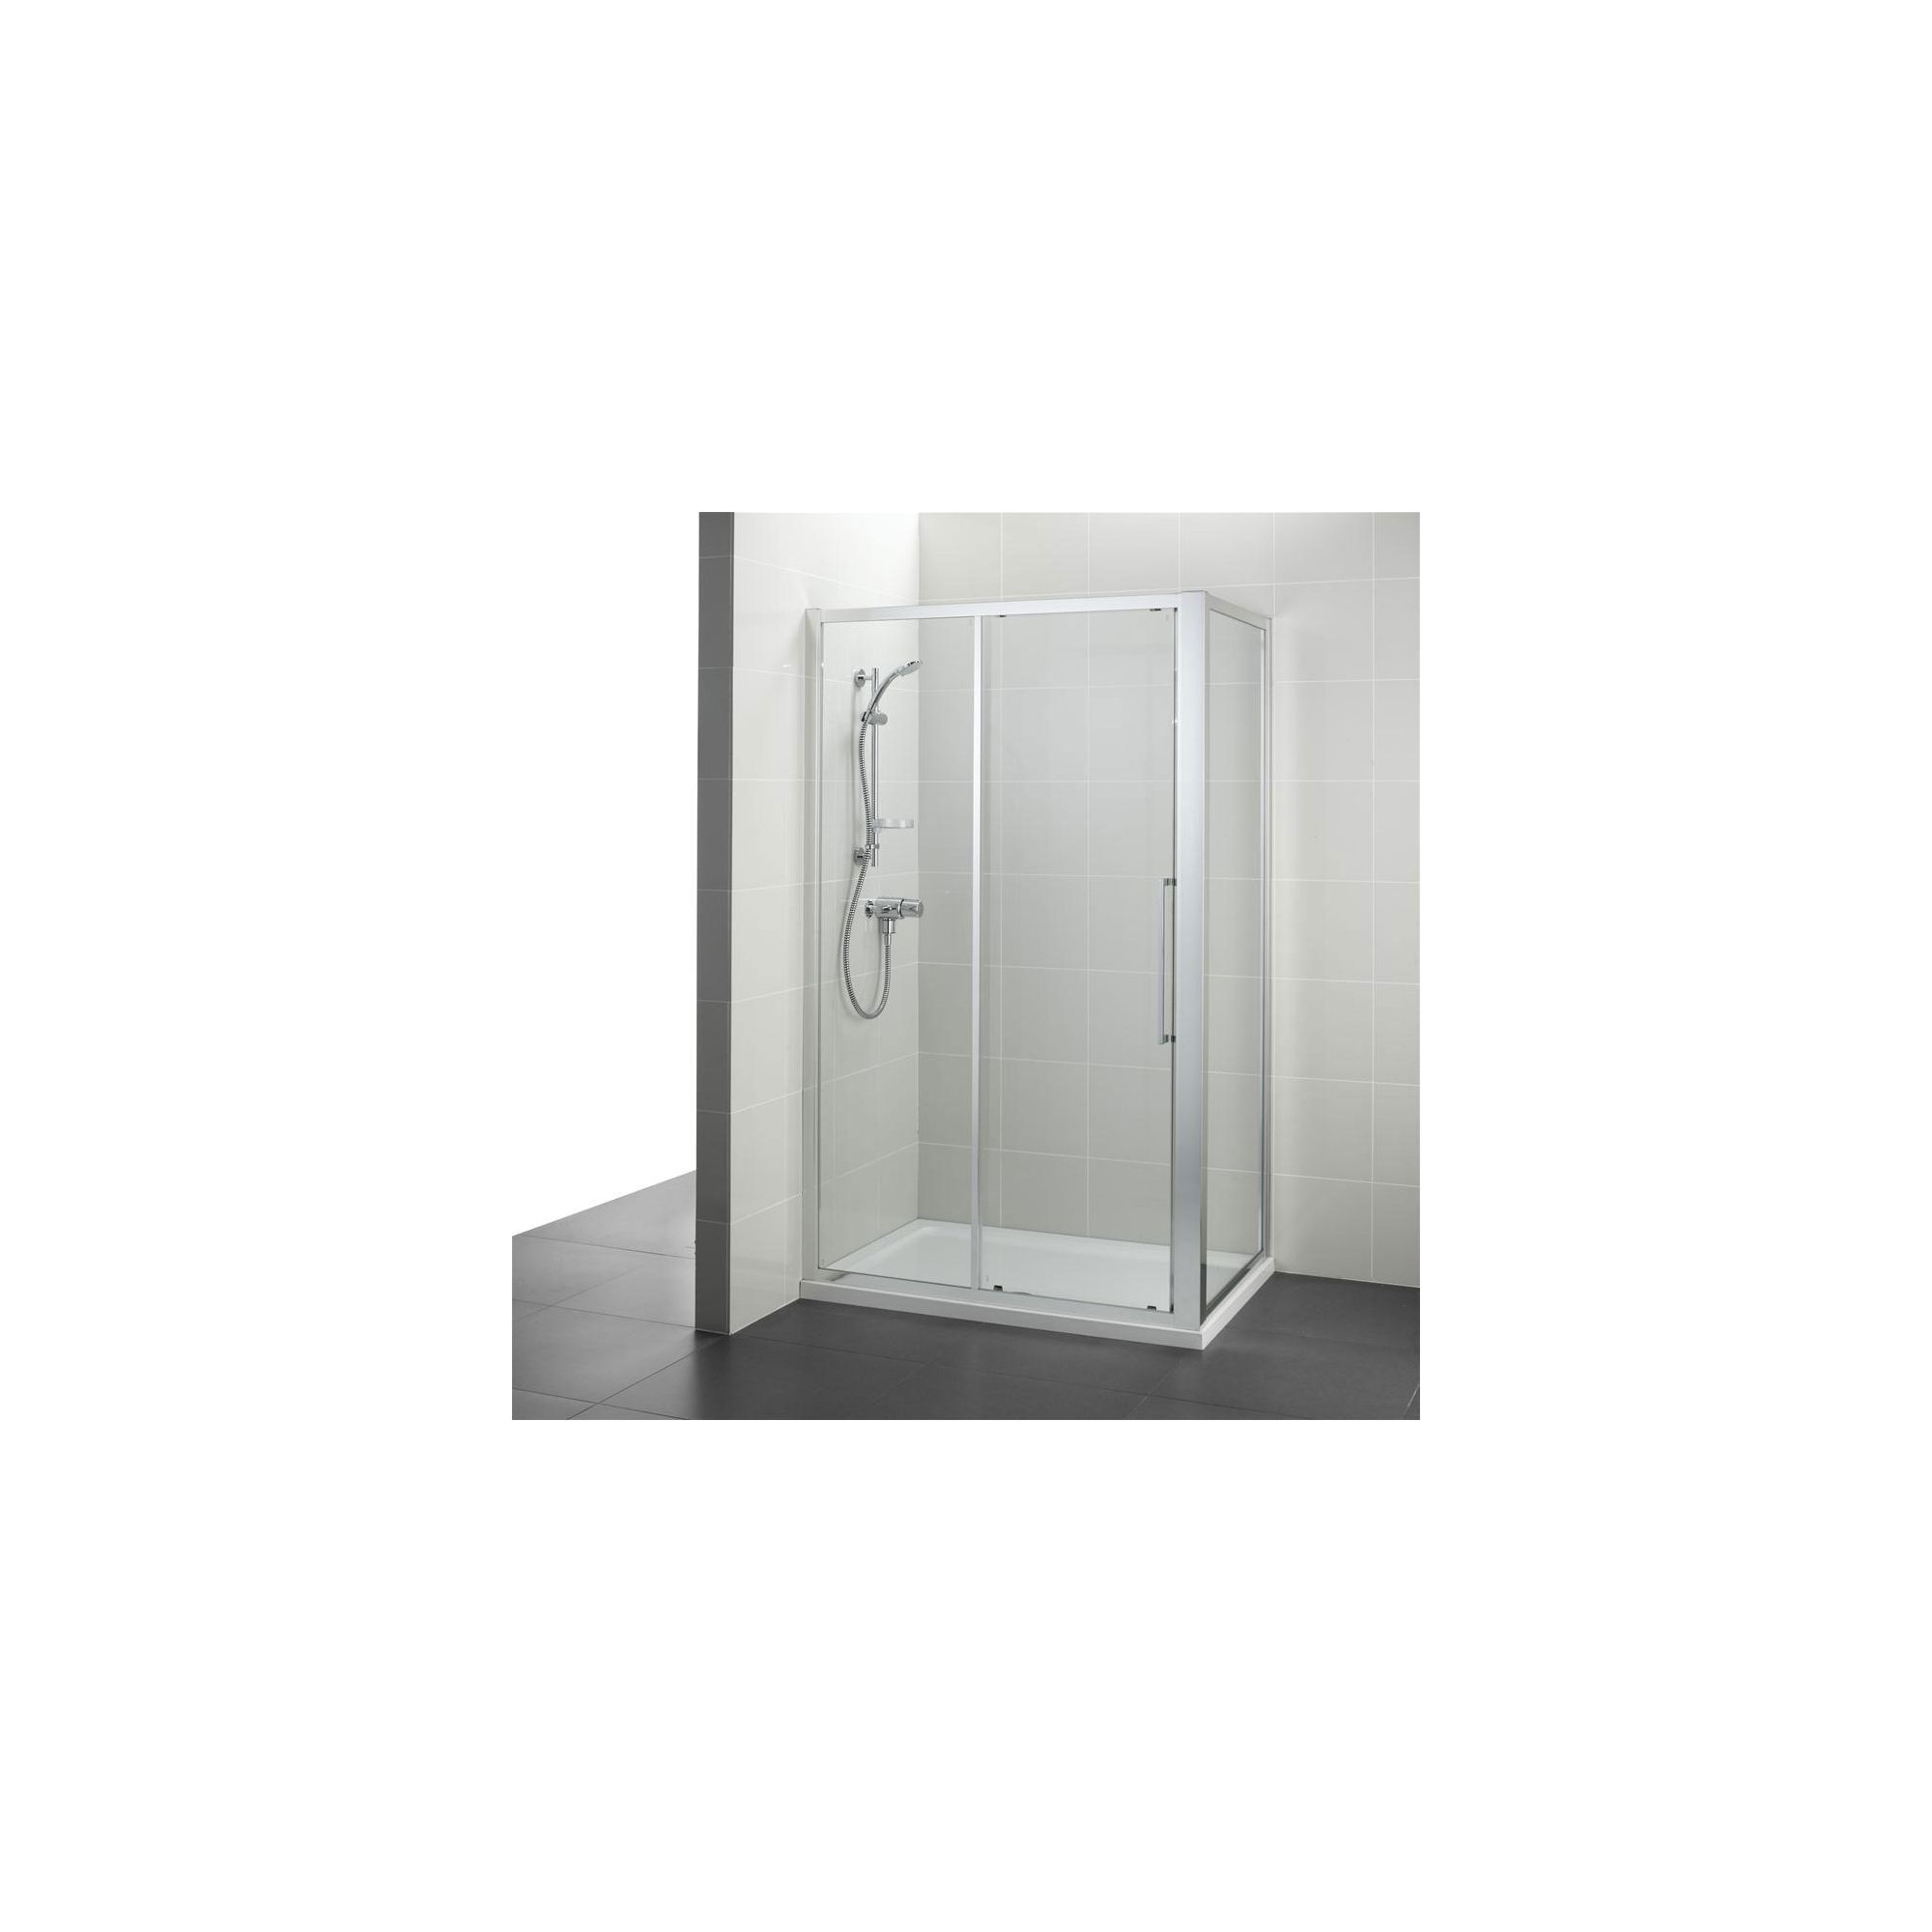 Ideal Standard Kubo Sliding Door Shower Enclosure, 1000mm x 800mm, Bright Silver Frame, Low Profile Tray at Tescos Direct